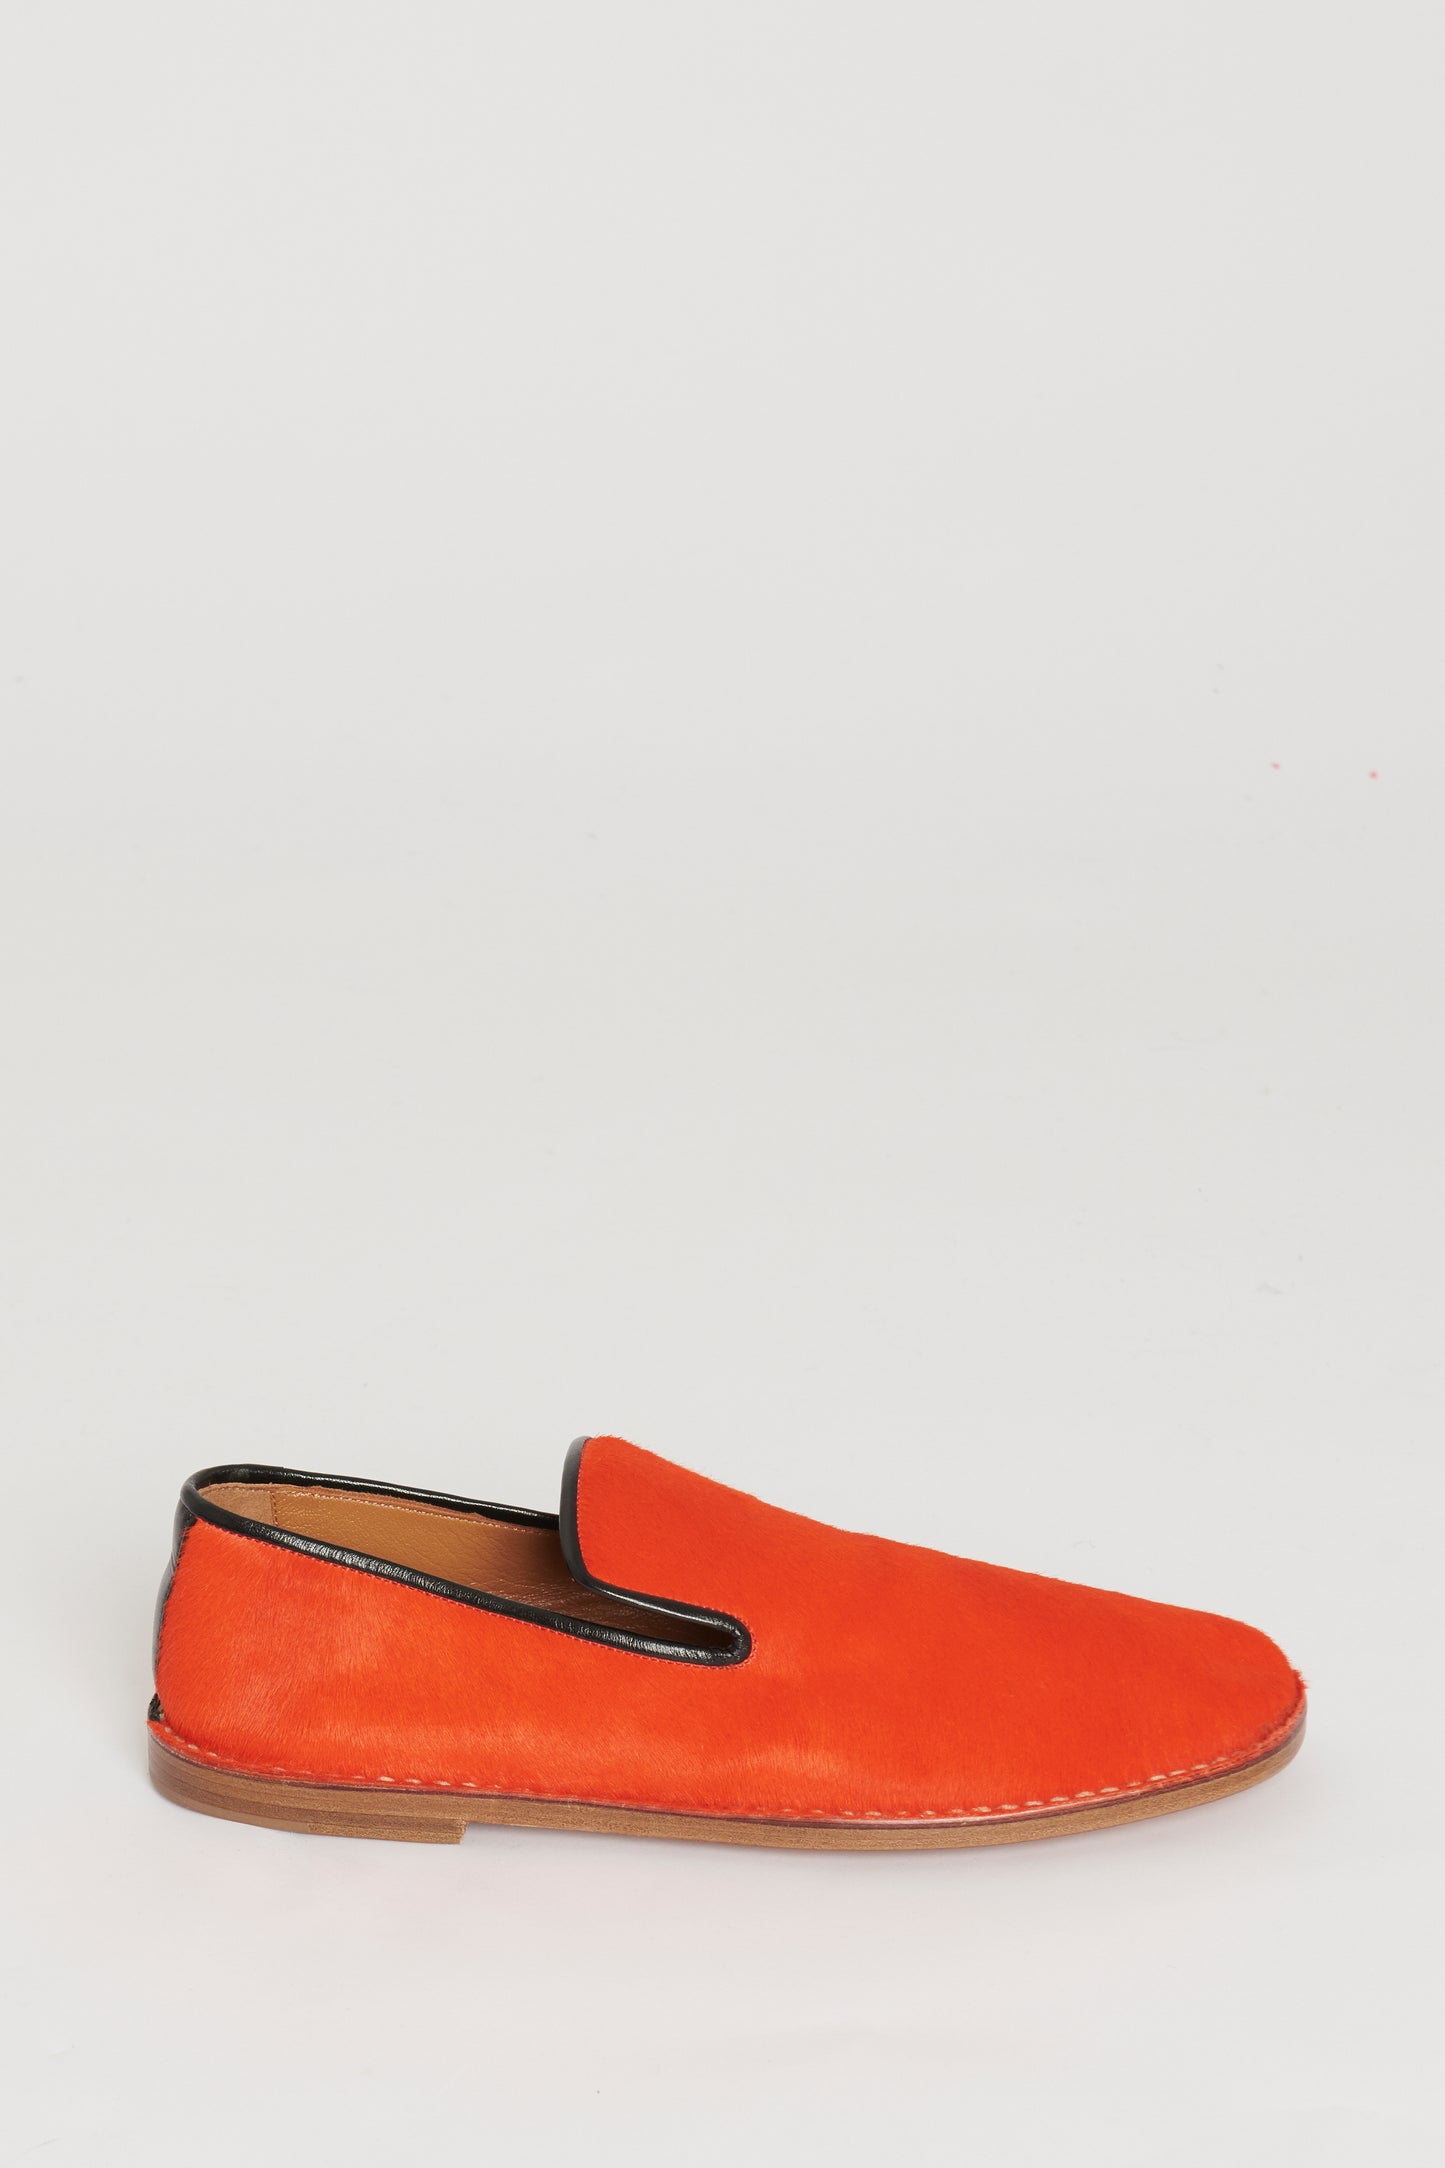 Orange Fur Preowned Loafers